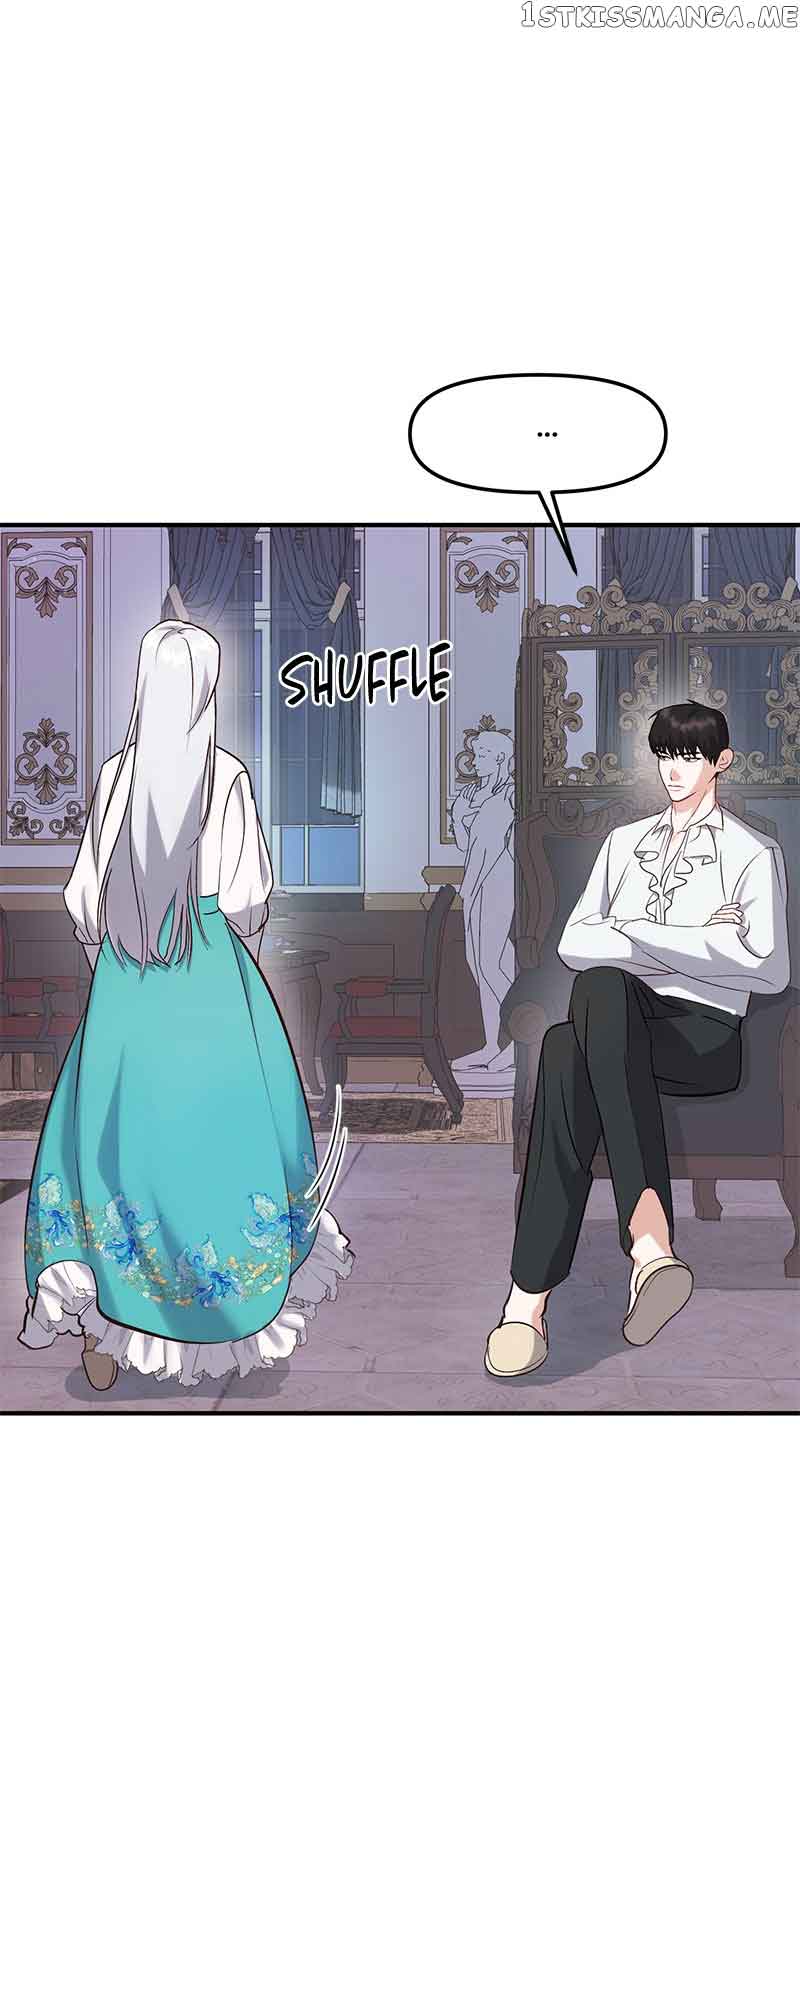 The Fake Duchess In Distresss chapter 17